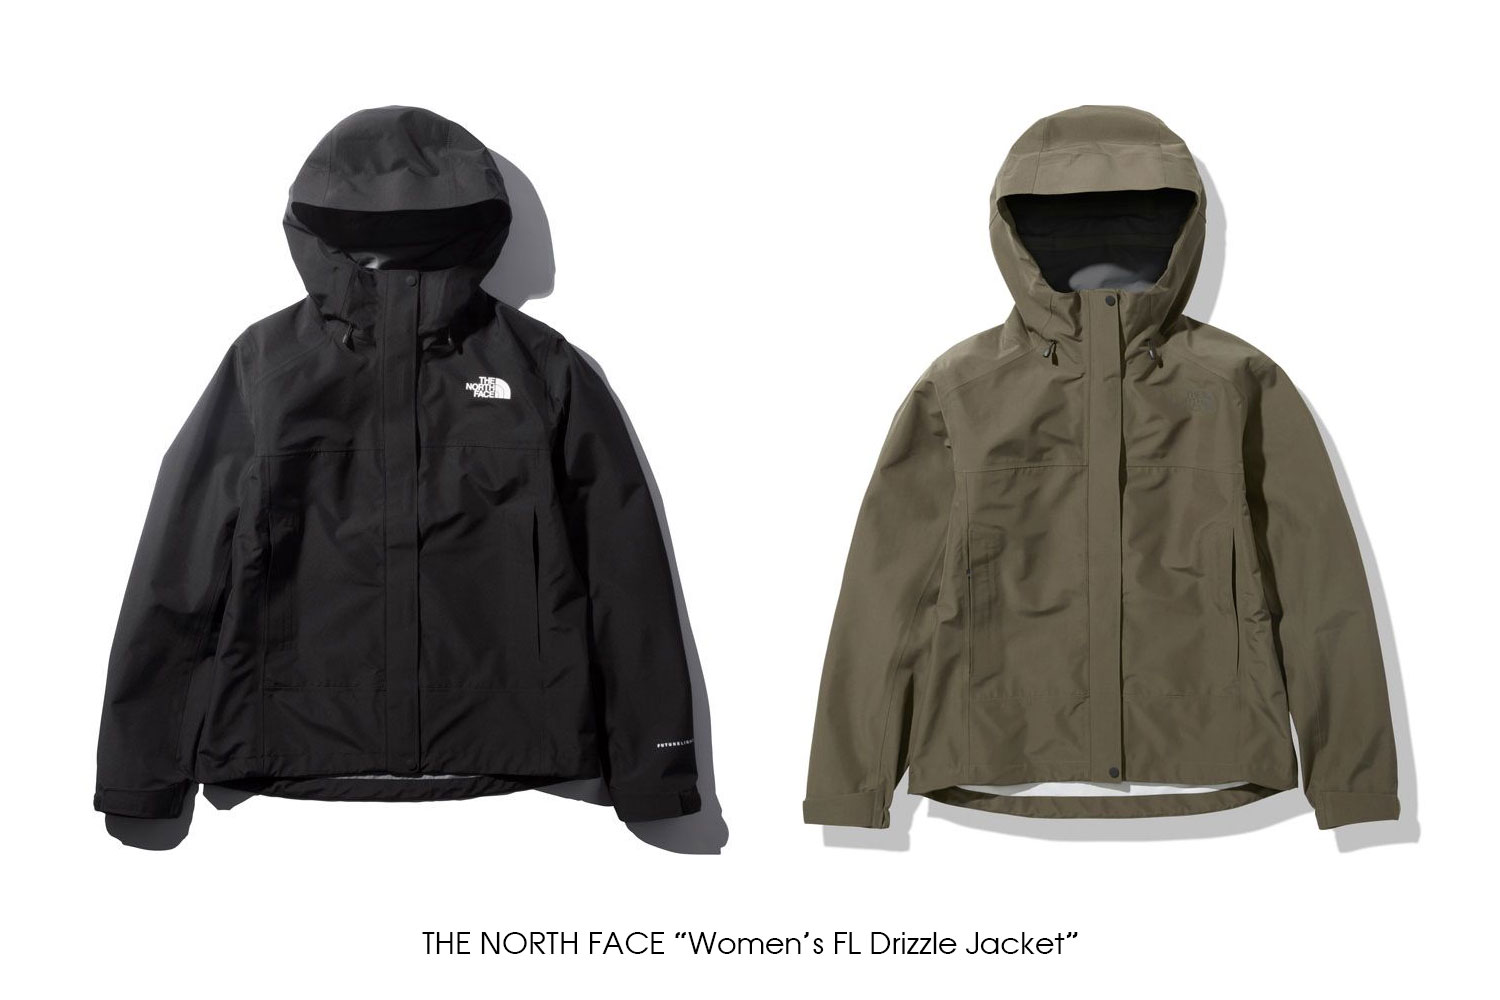 THE NORTH FACE "FL Drizzle Jacket"